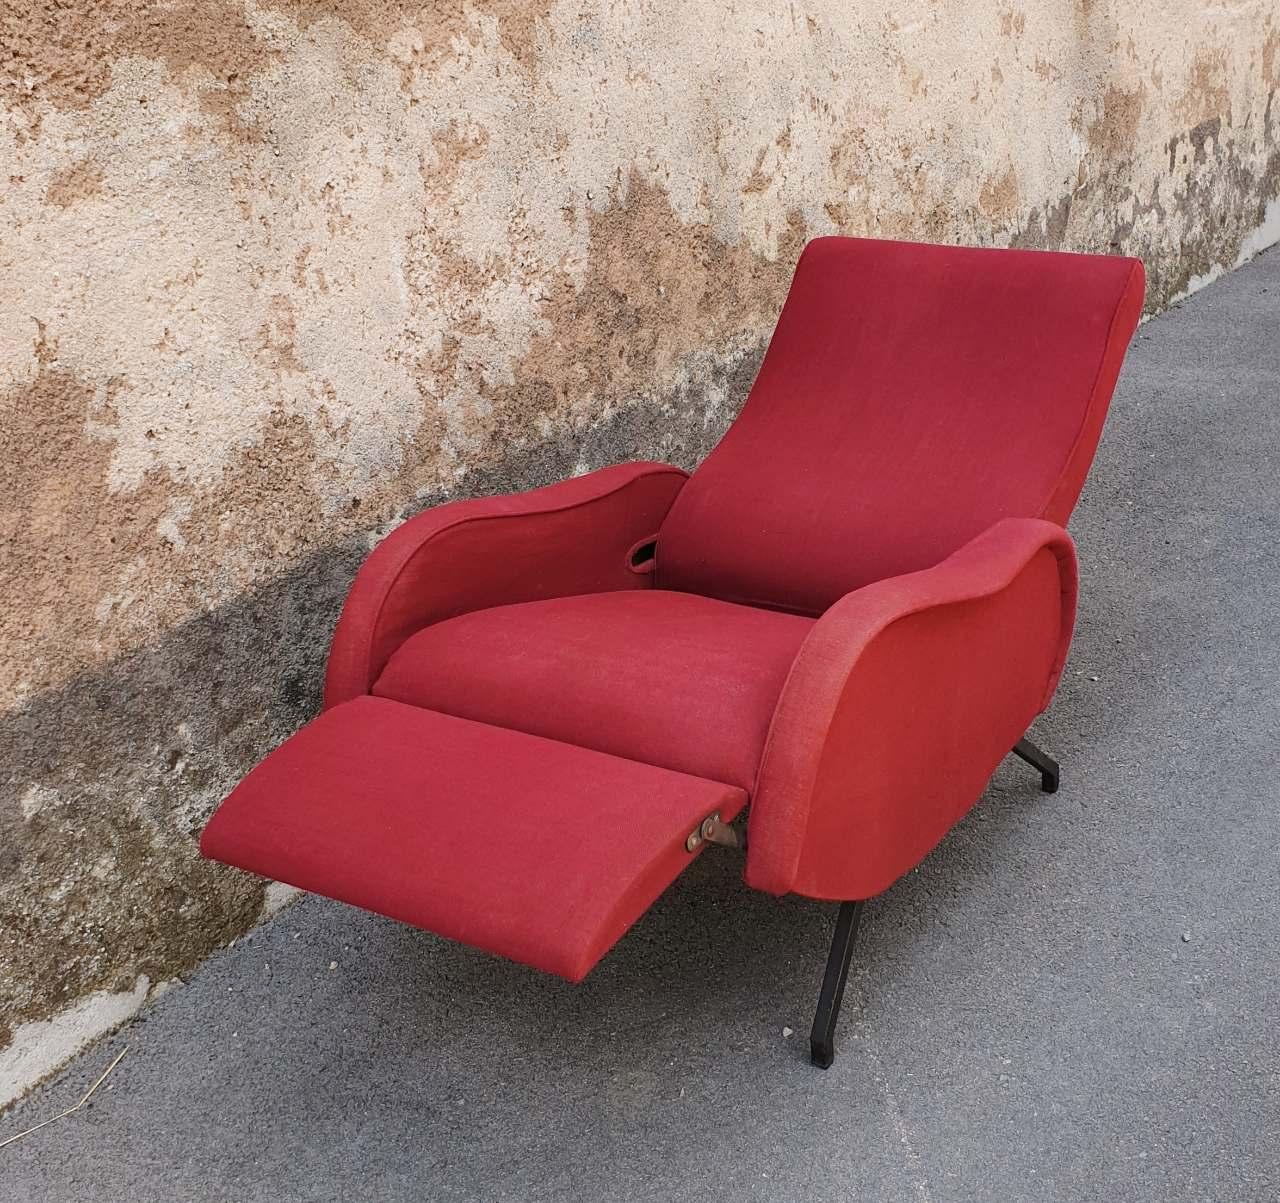 Mid-20th Century Midcentury Red Reclining Armchair, Marco Zanuso Style, Studio Pizzoli Italy 60s For Sale